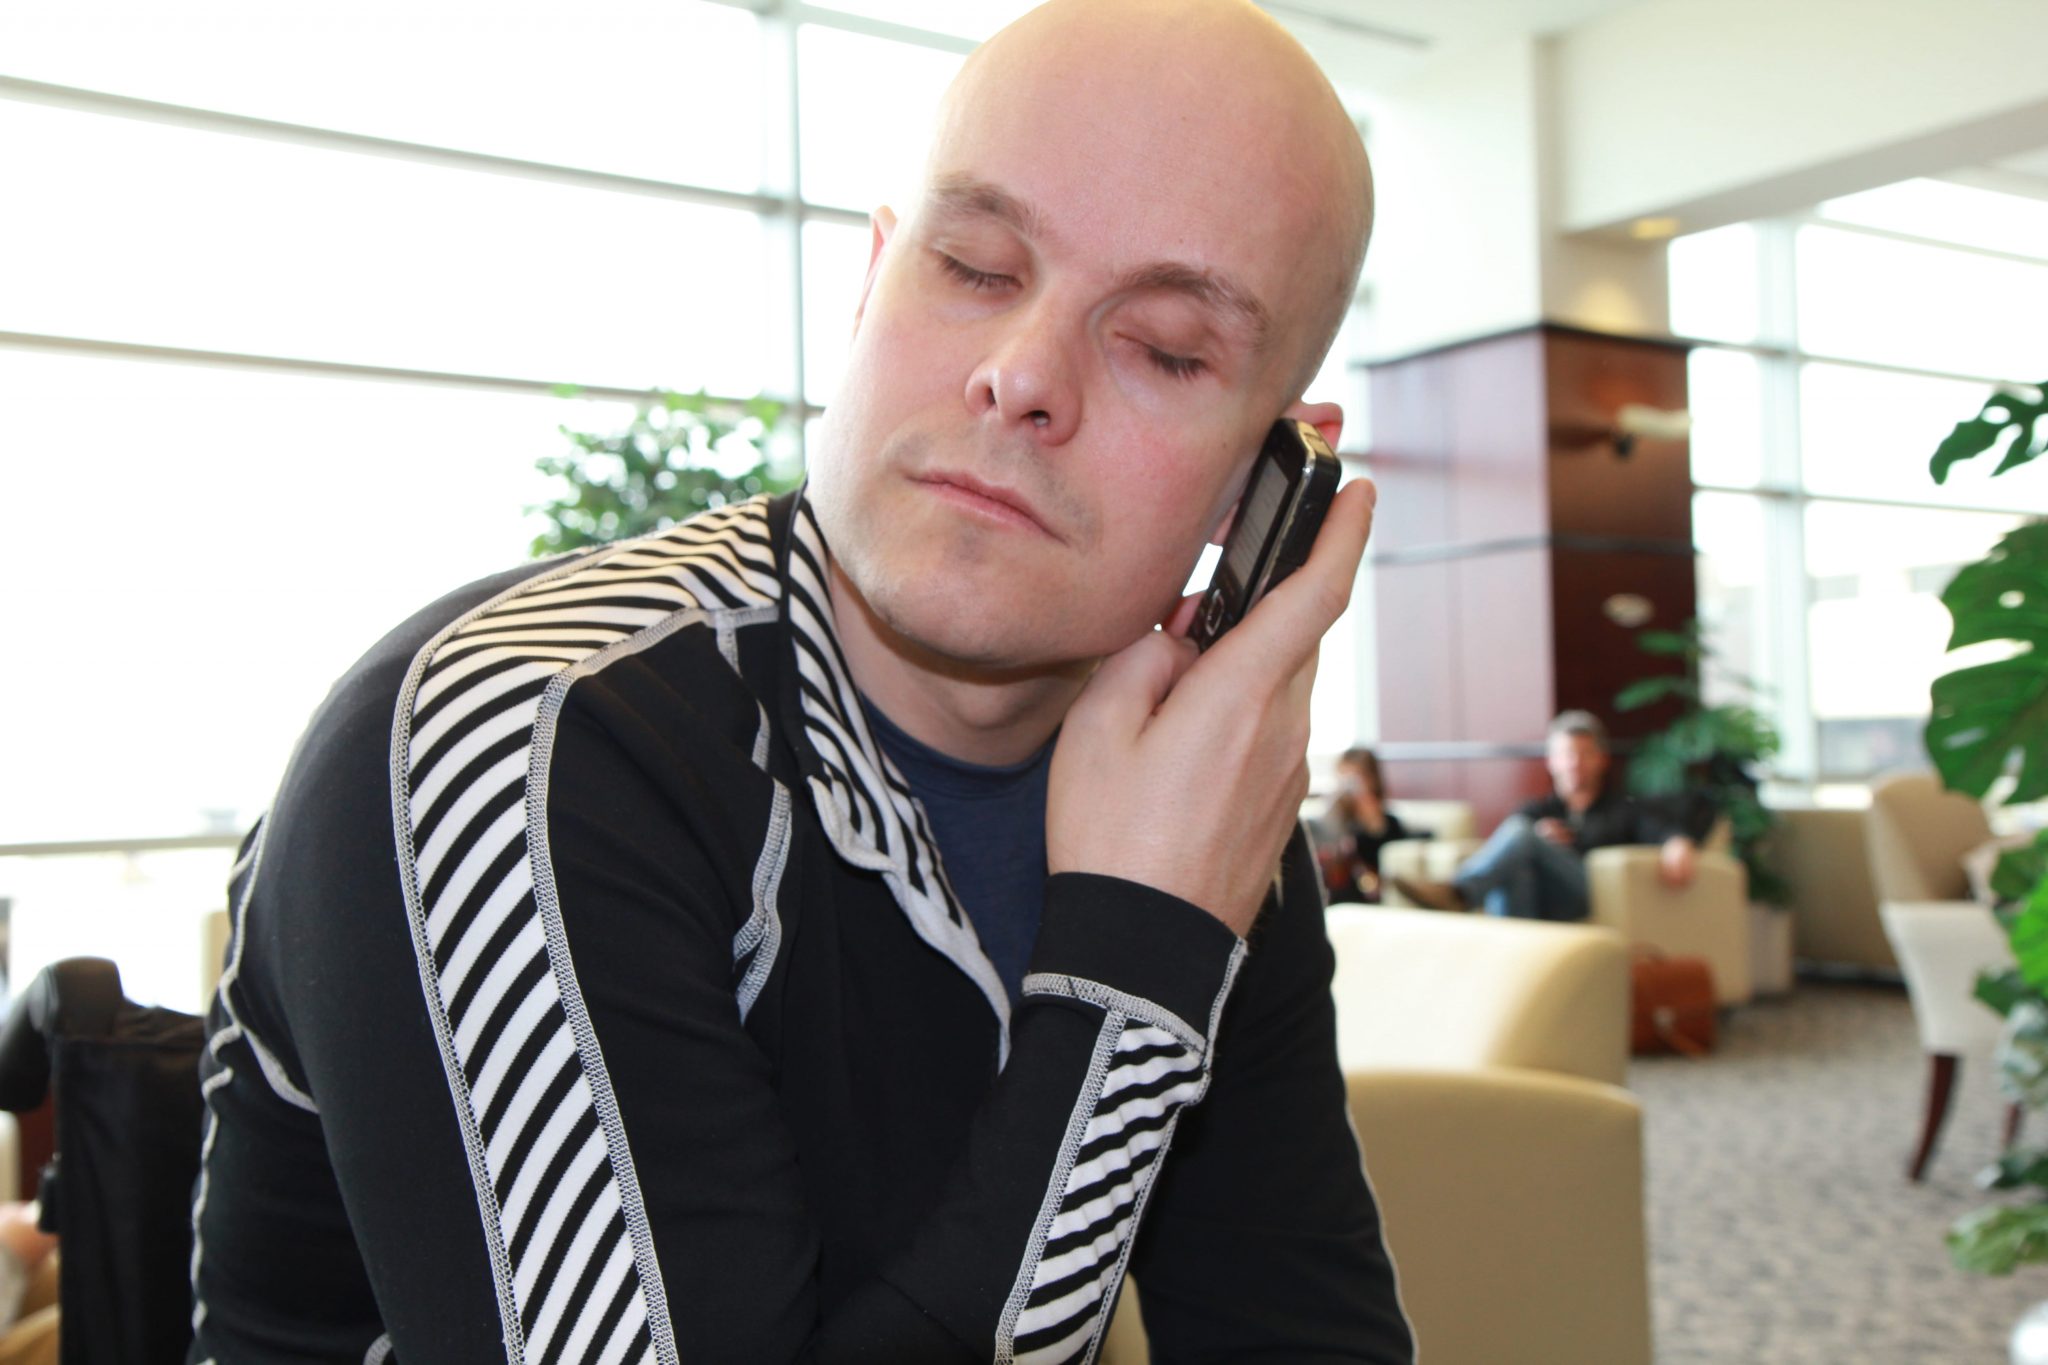 Mark Pollock holding a mobile telephone as he speaks to potential sponsors